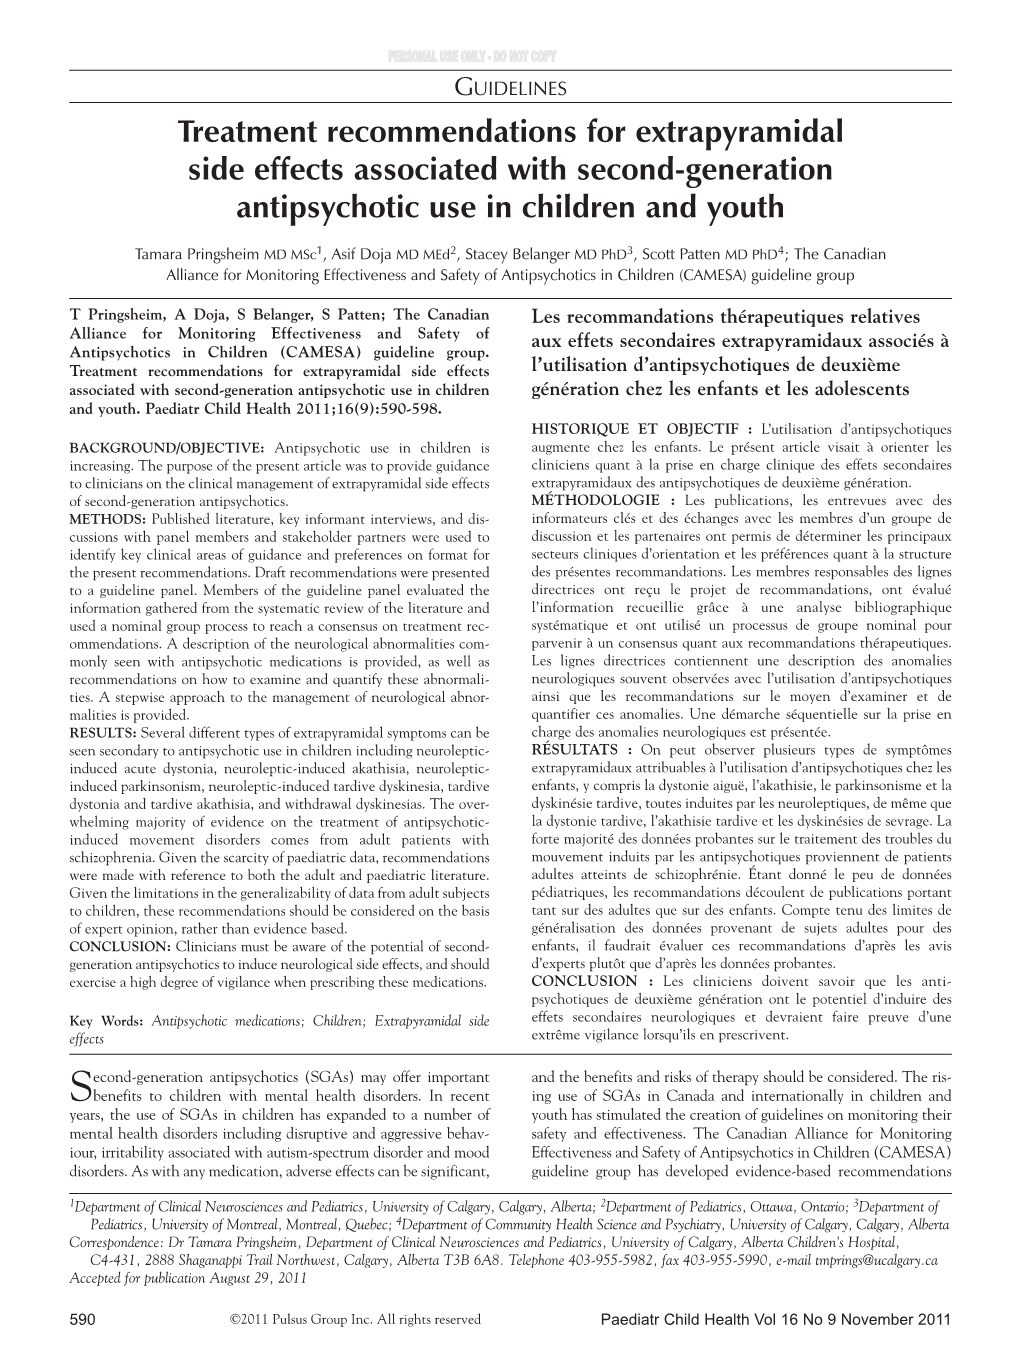 Treatment Recommendations for Extrapyramidal Side Effects Associated with Second-Generation Antipsychotic Use in Children and Youth